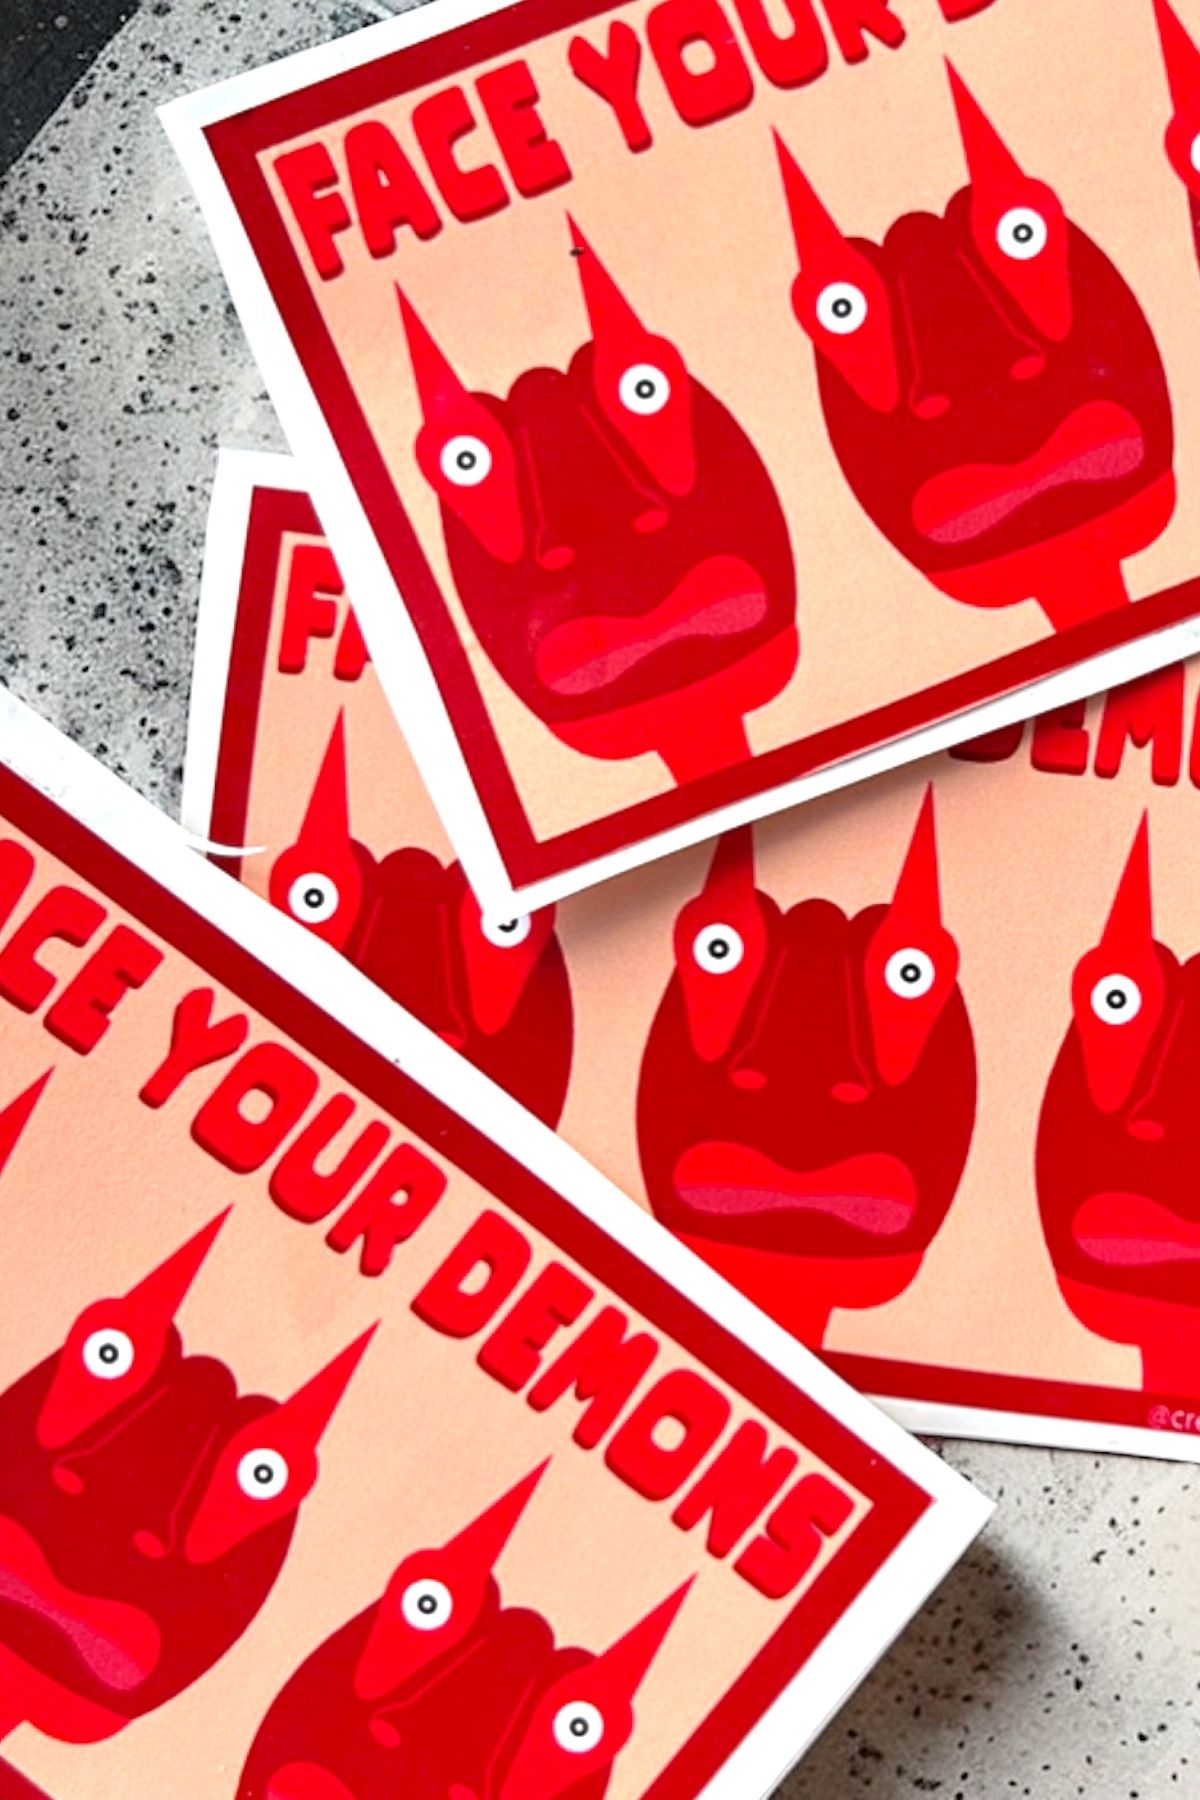 creative crush co. FACE YOUR DEMONS STICKER